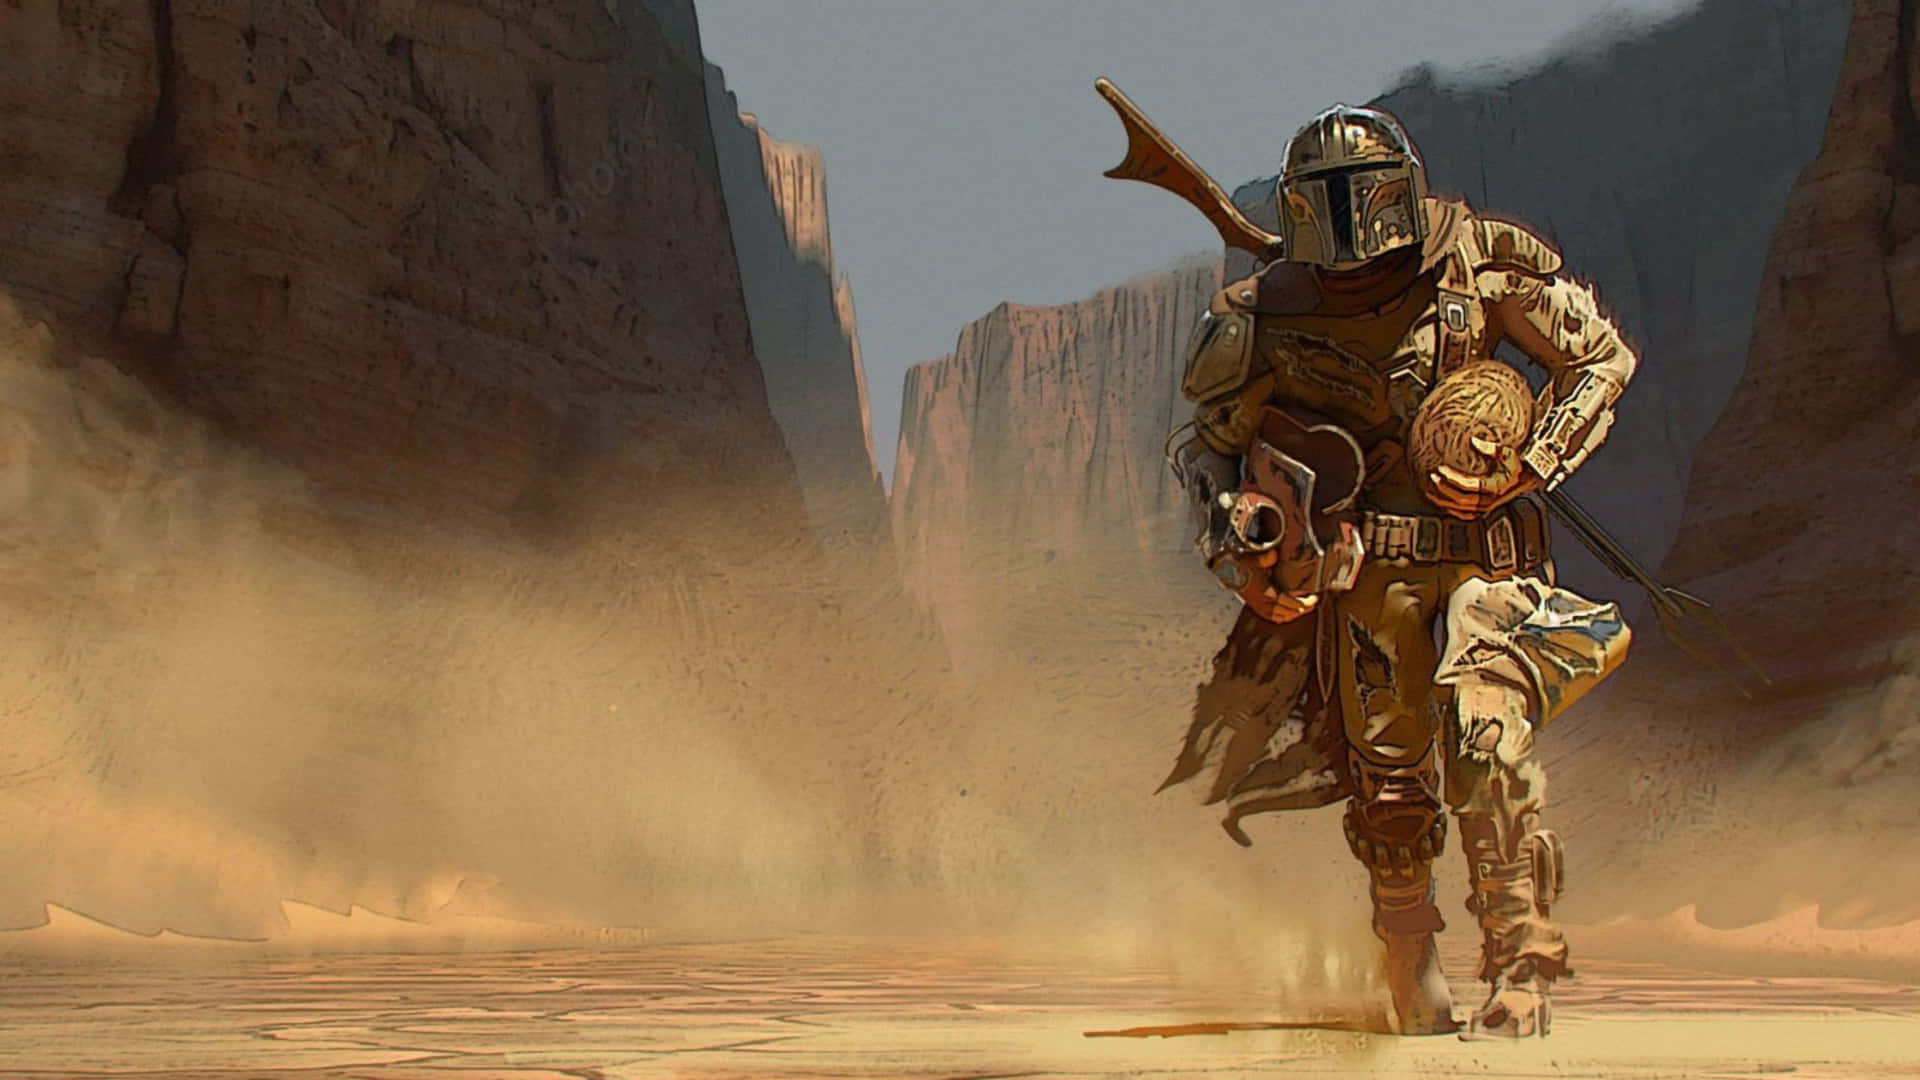 Meet the characters of Star Wars The Mandalorian